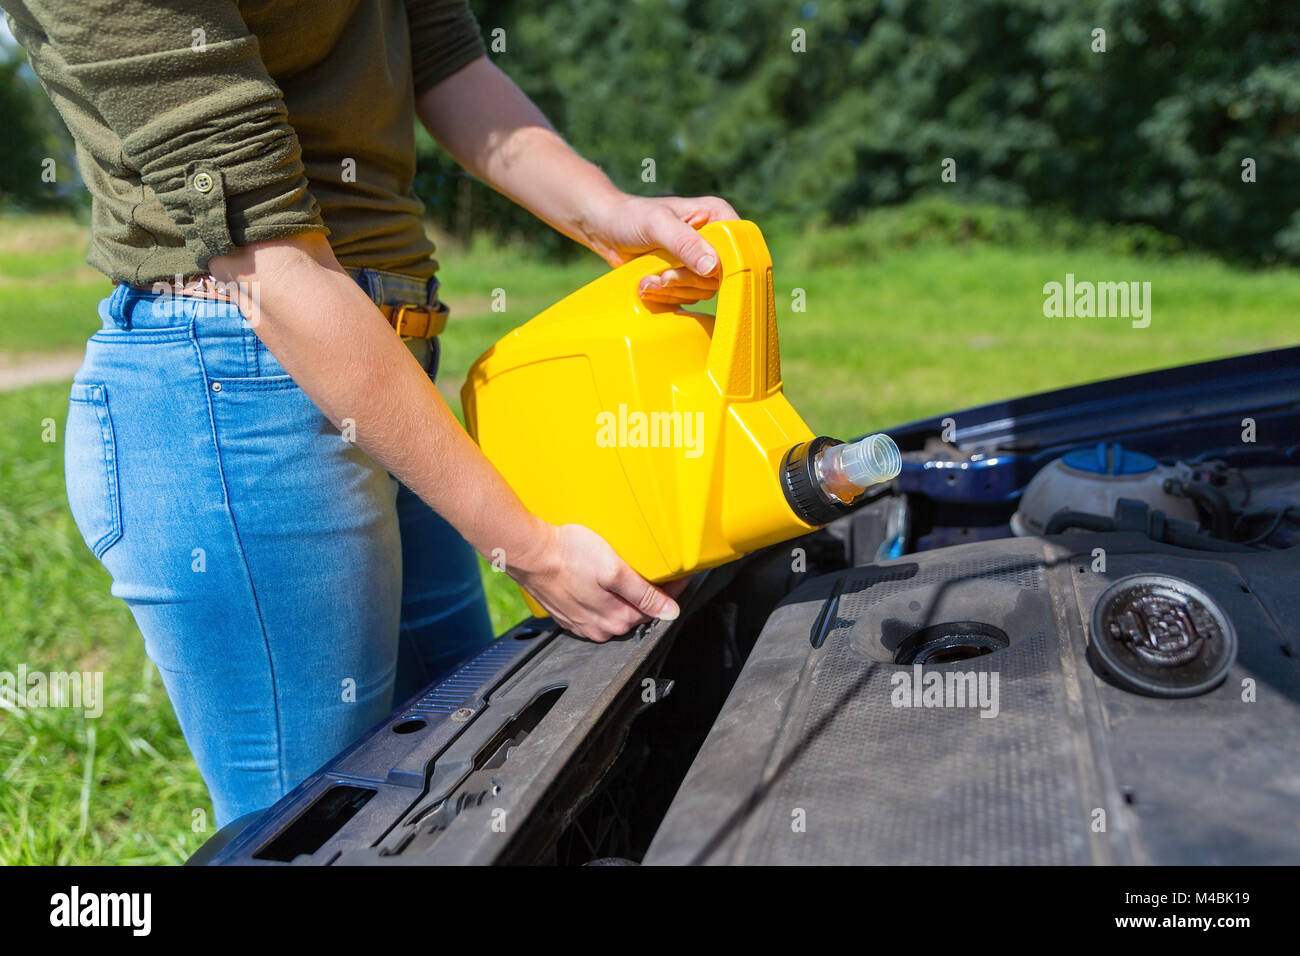 Woman filling car motor with oil in jerrycan Stock Photo